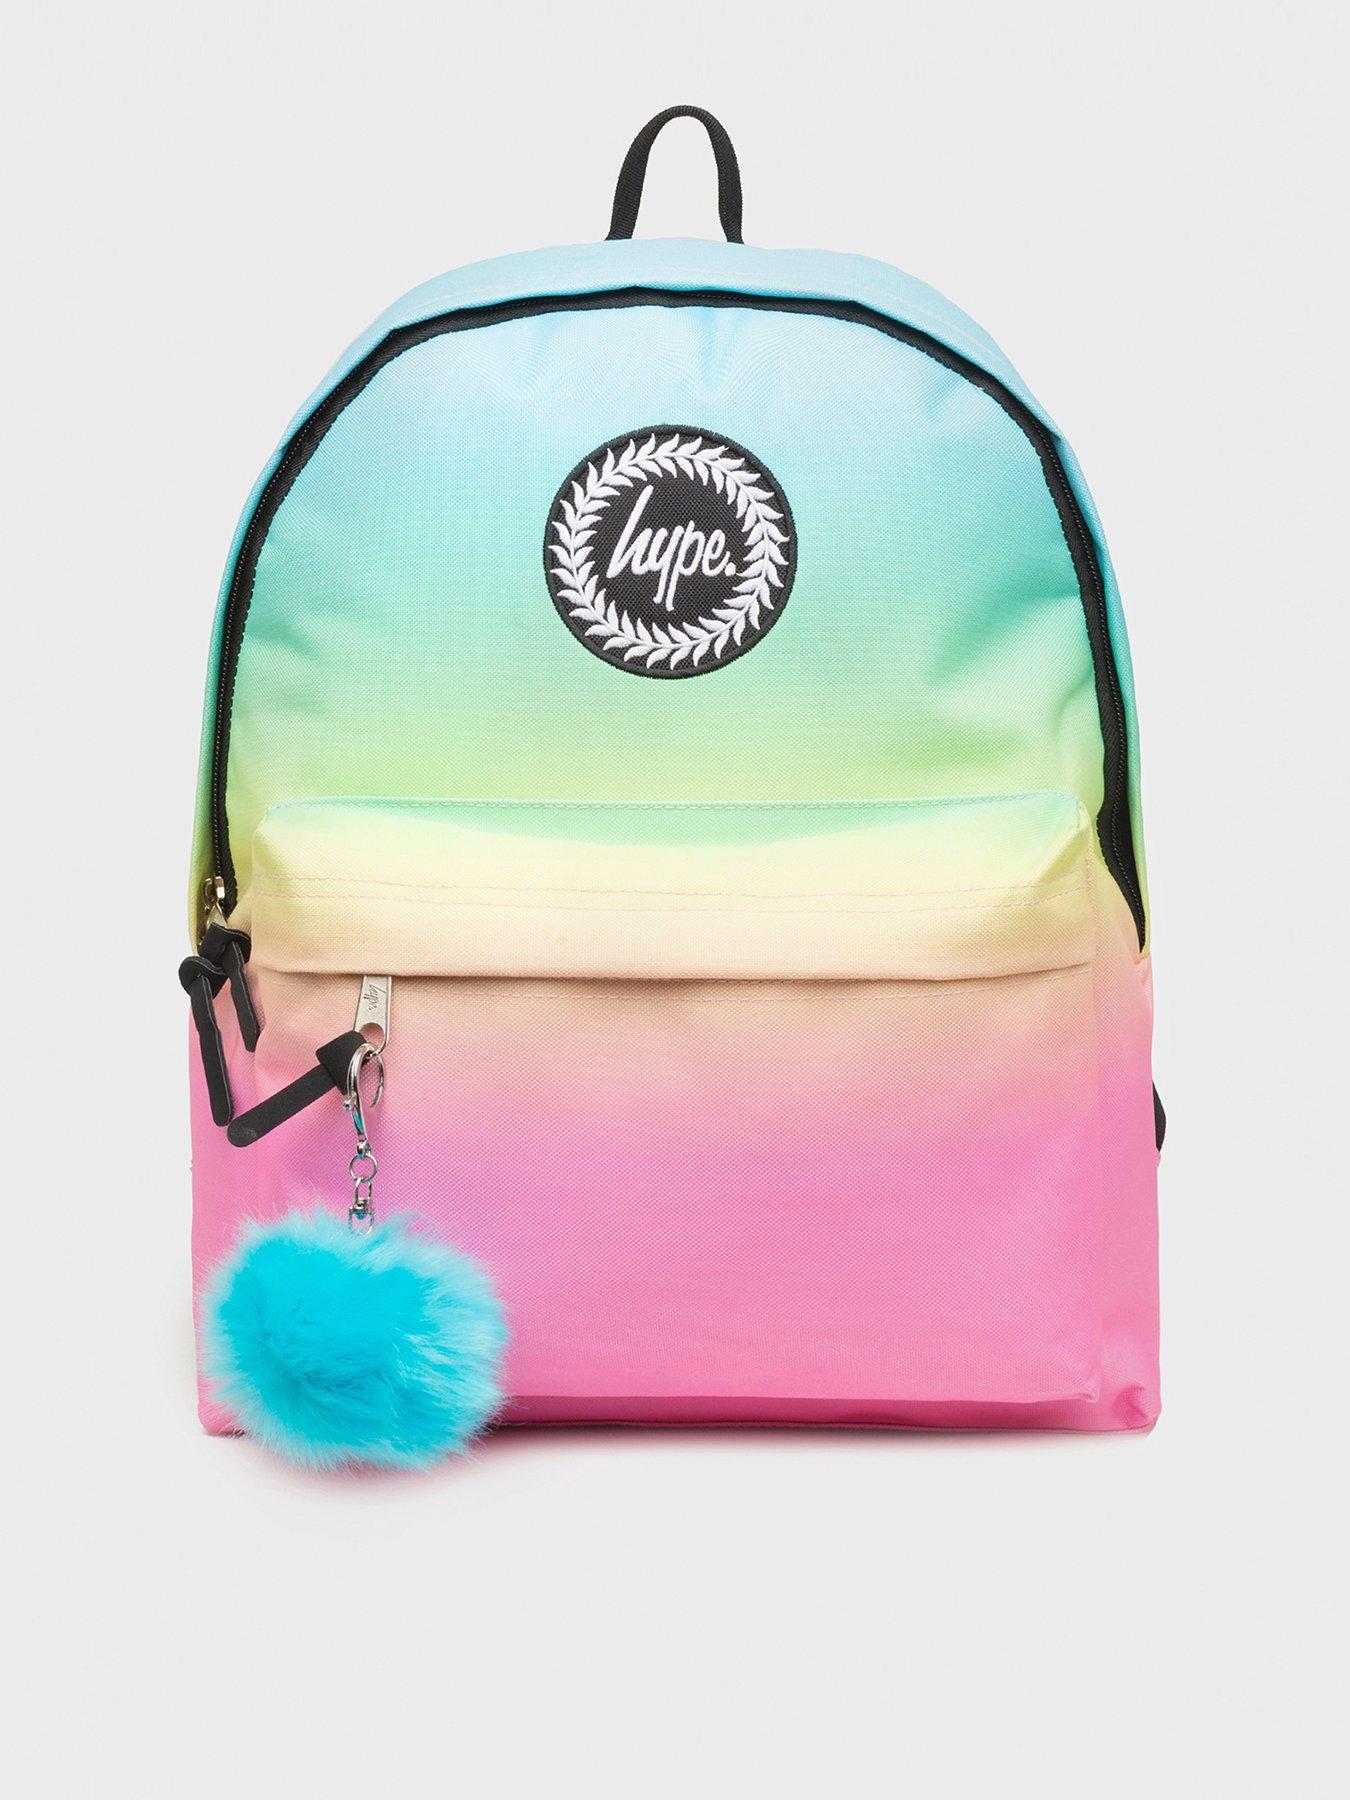 hype backpack next